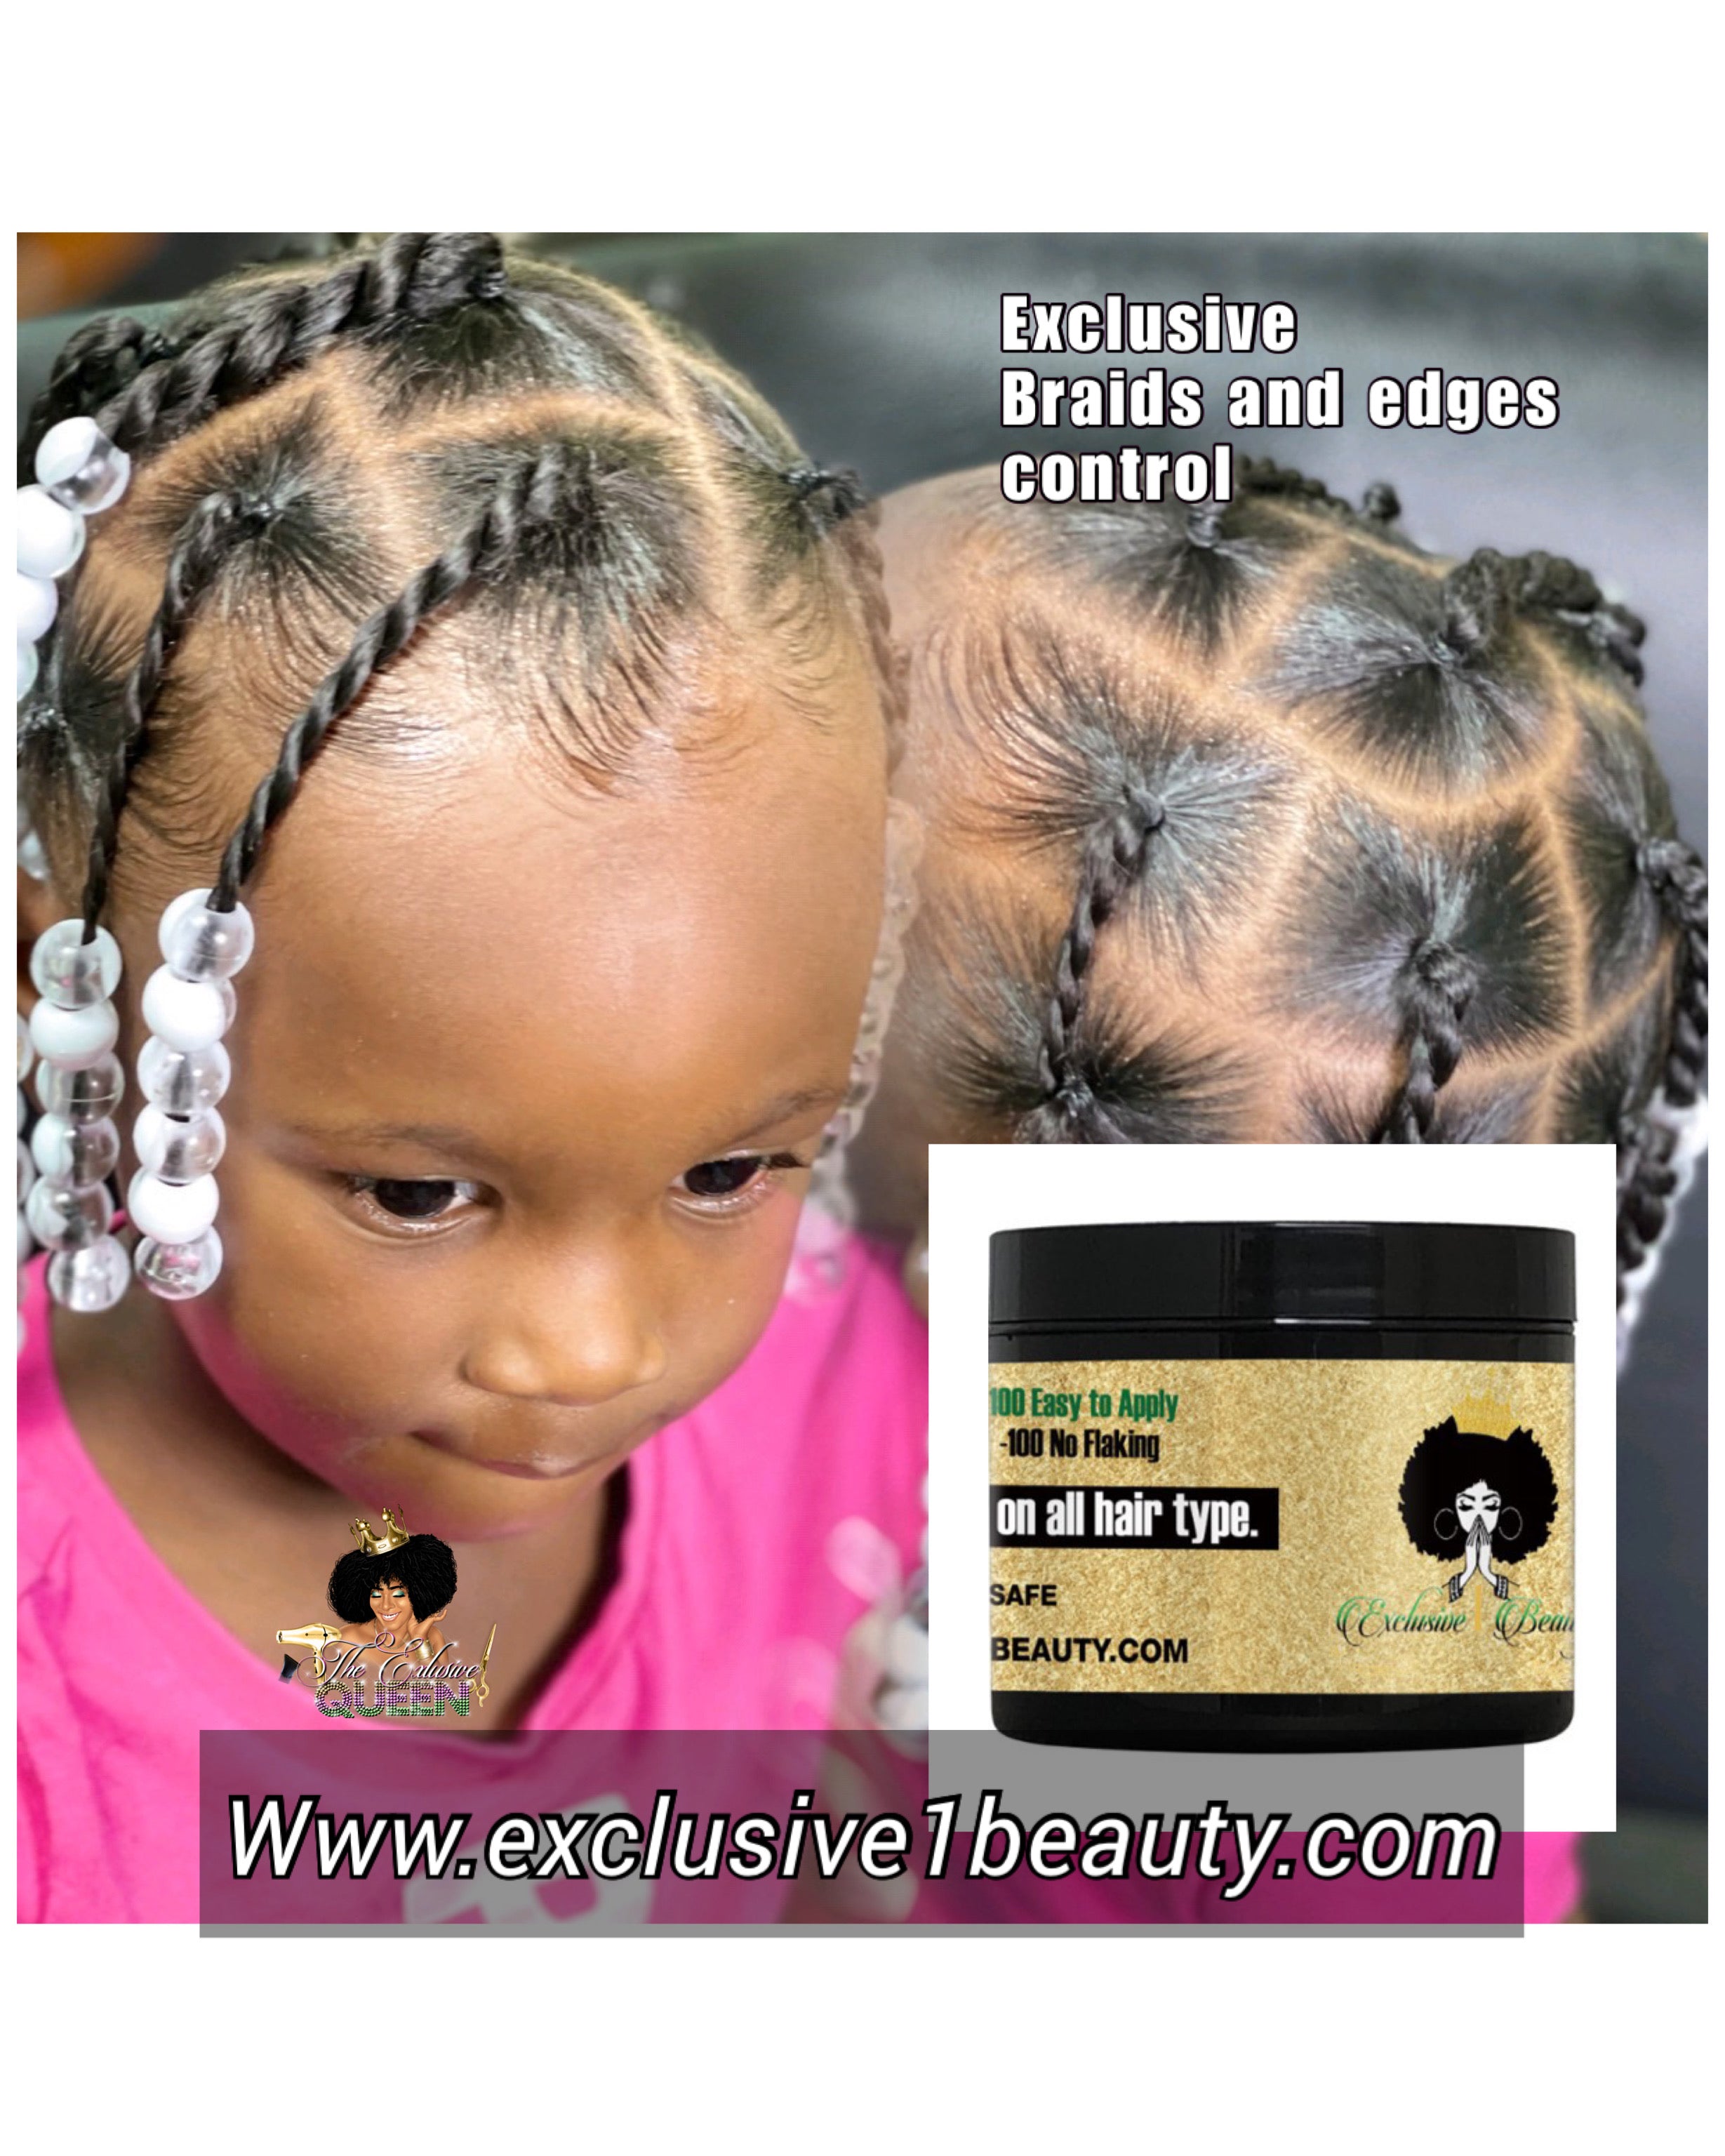 Edges Control 48hr hold 100% Quick Dry 100% NON STICKY 100%NO FLAKING WORK WONDERS ON ALL HAIRTYPE.4oz